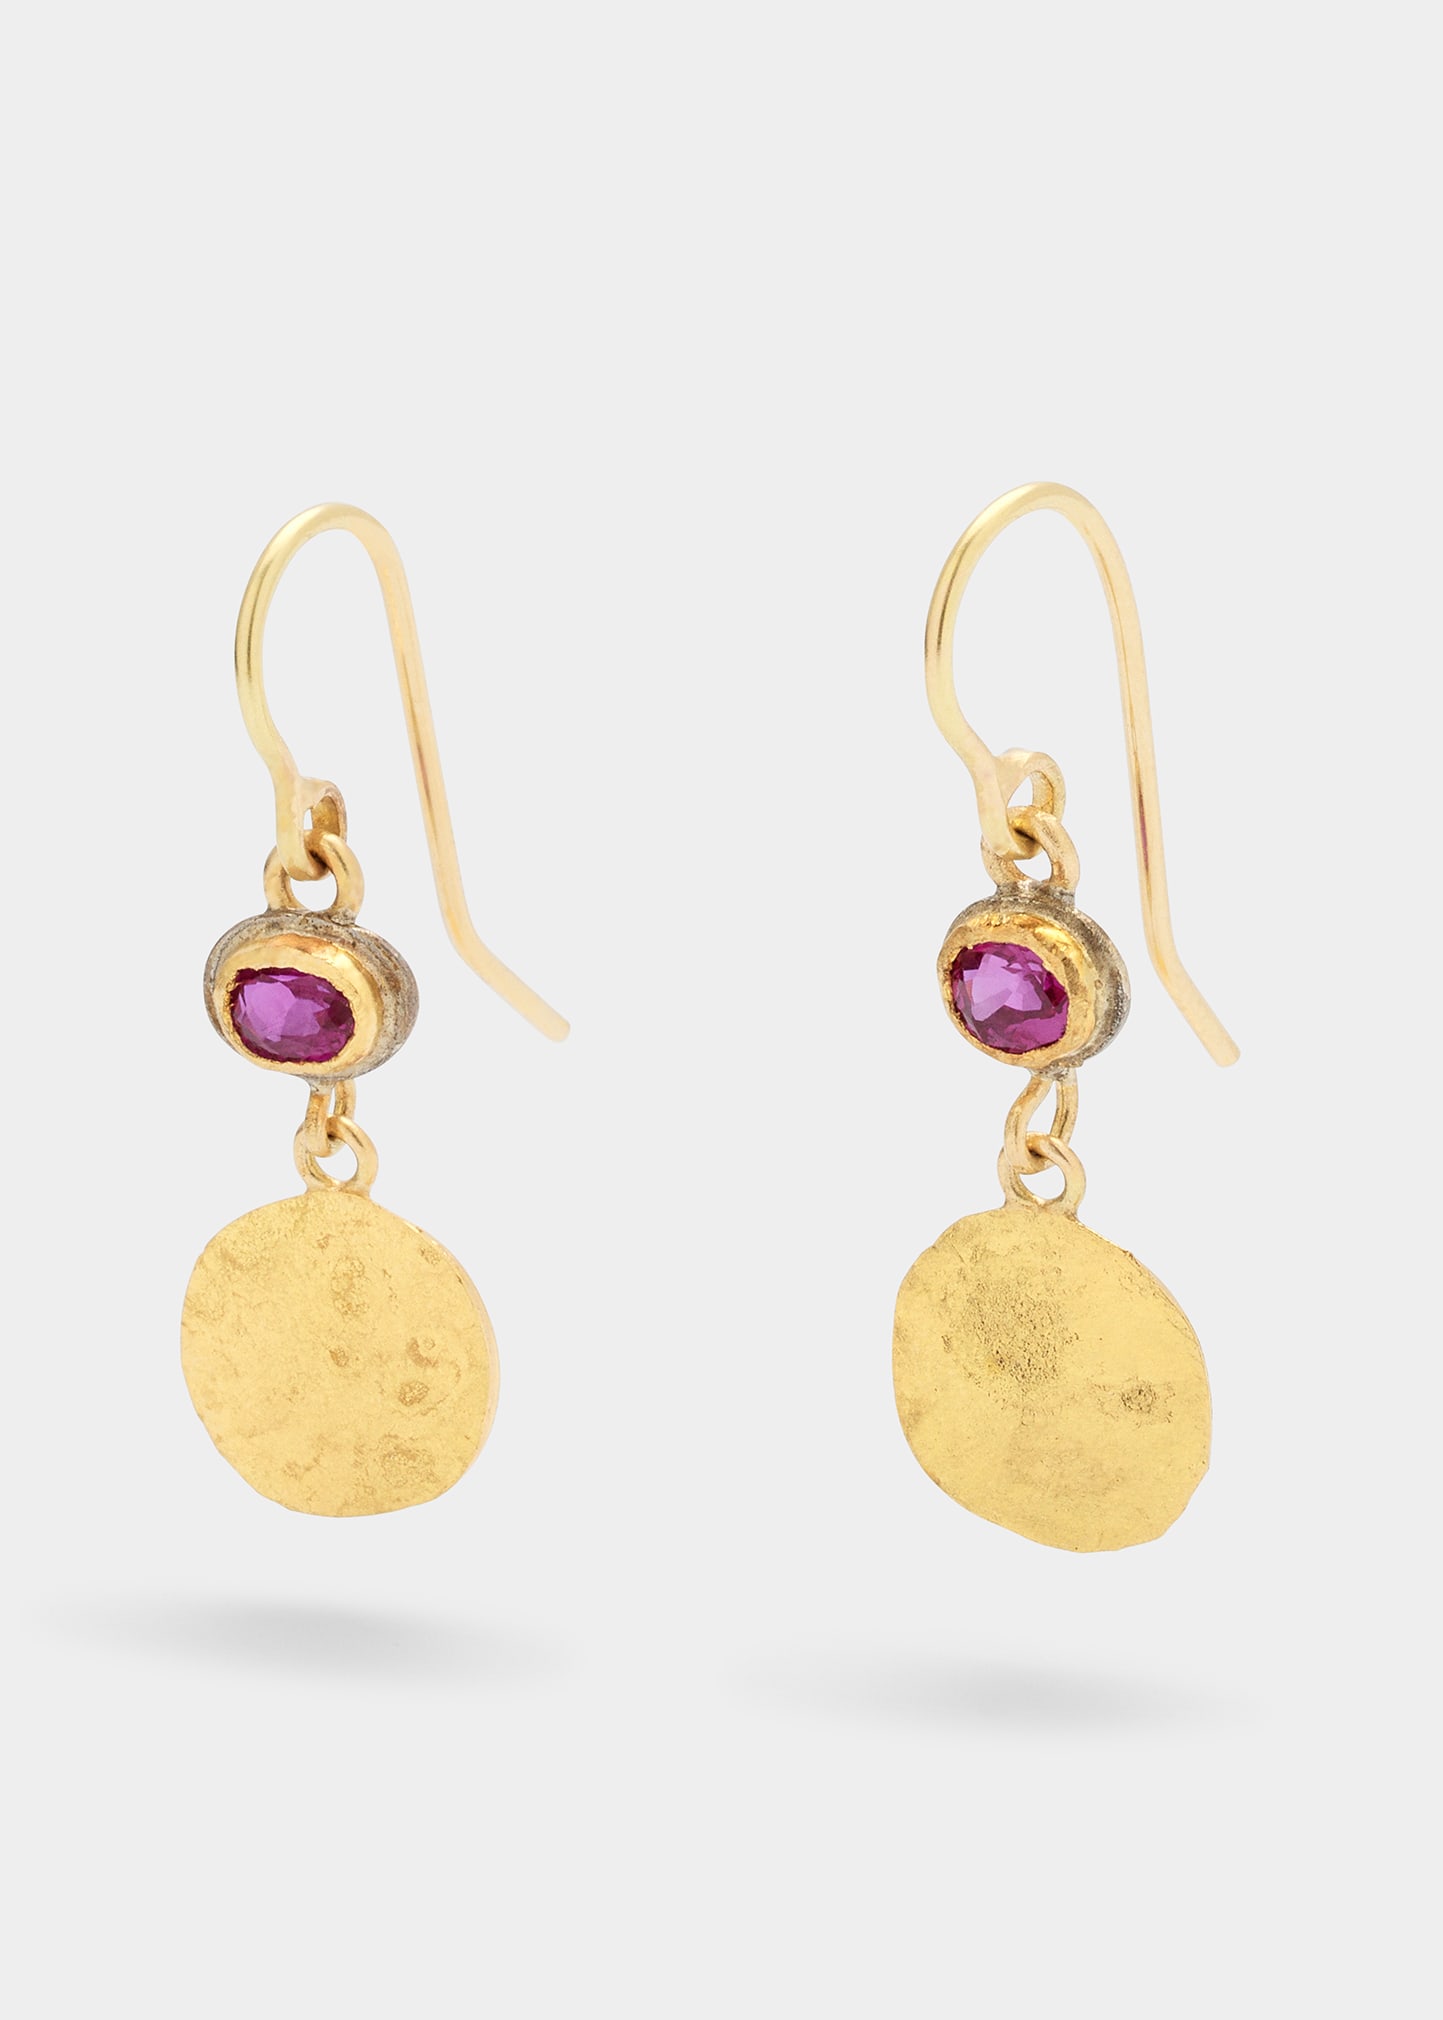 JUDY GEIB Small Oval Ruby and 22K Squash Double Drop Earrings